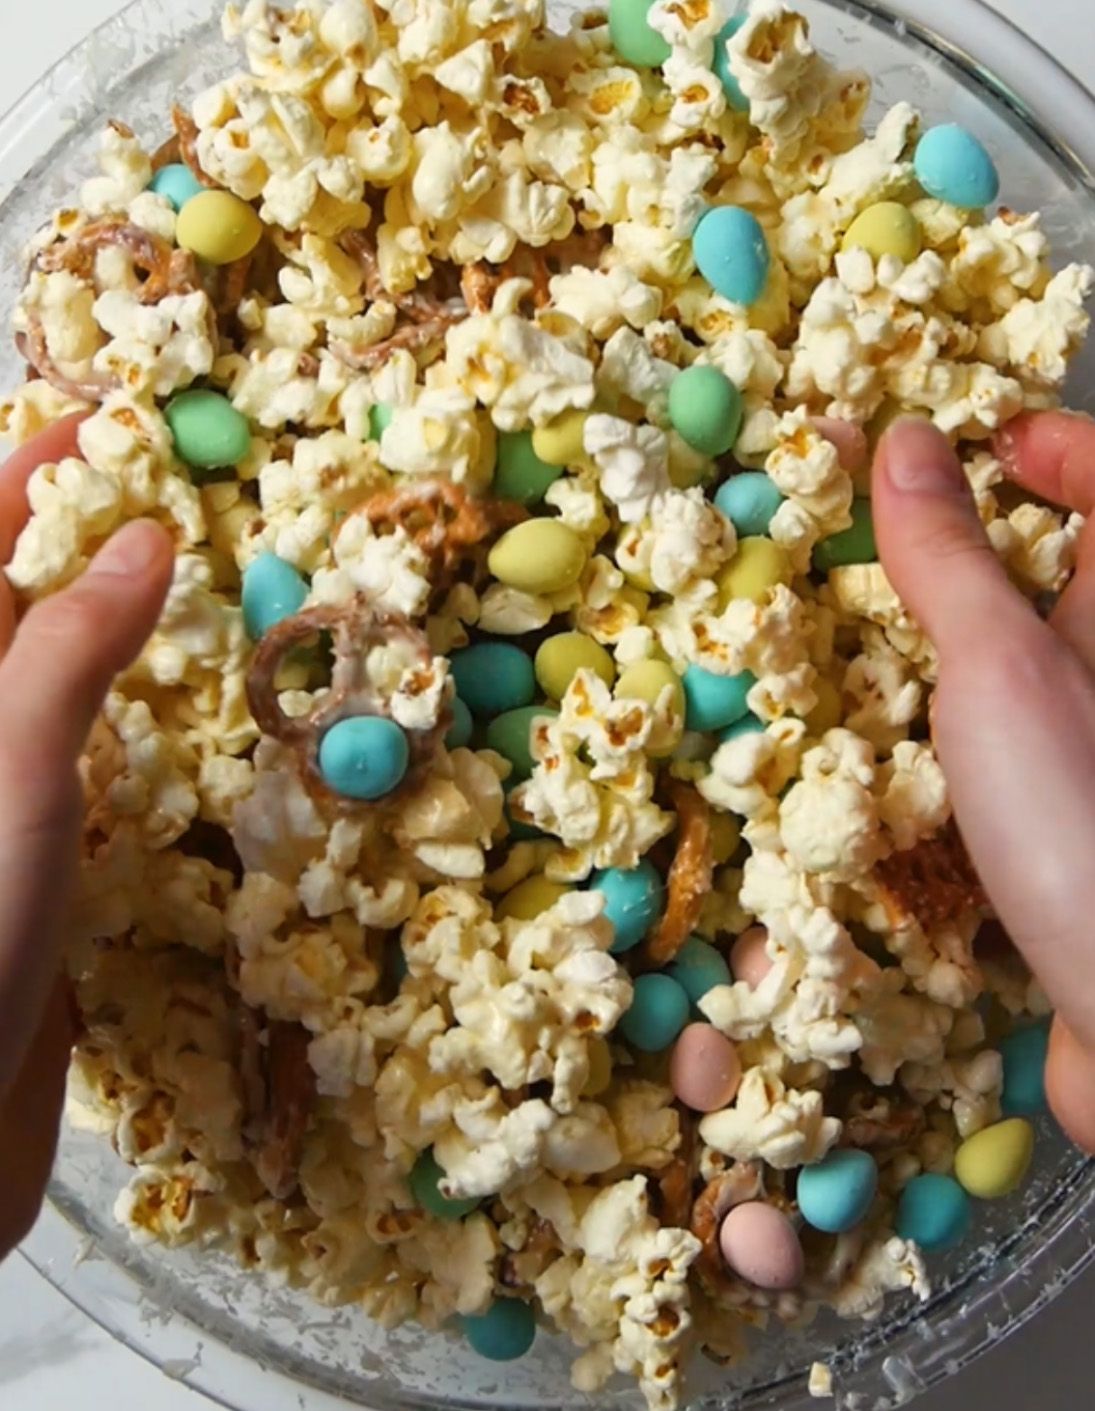 mini eggs being mixed into popcorn